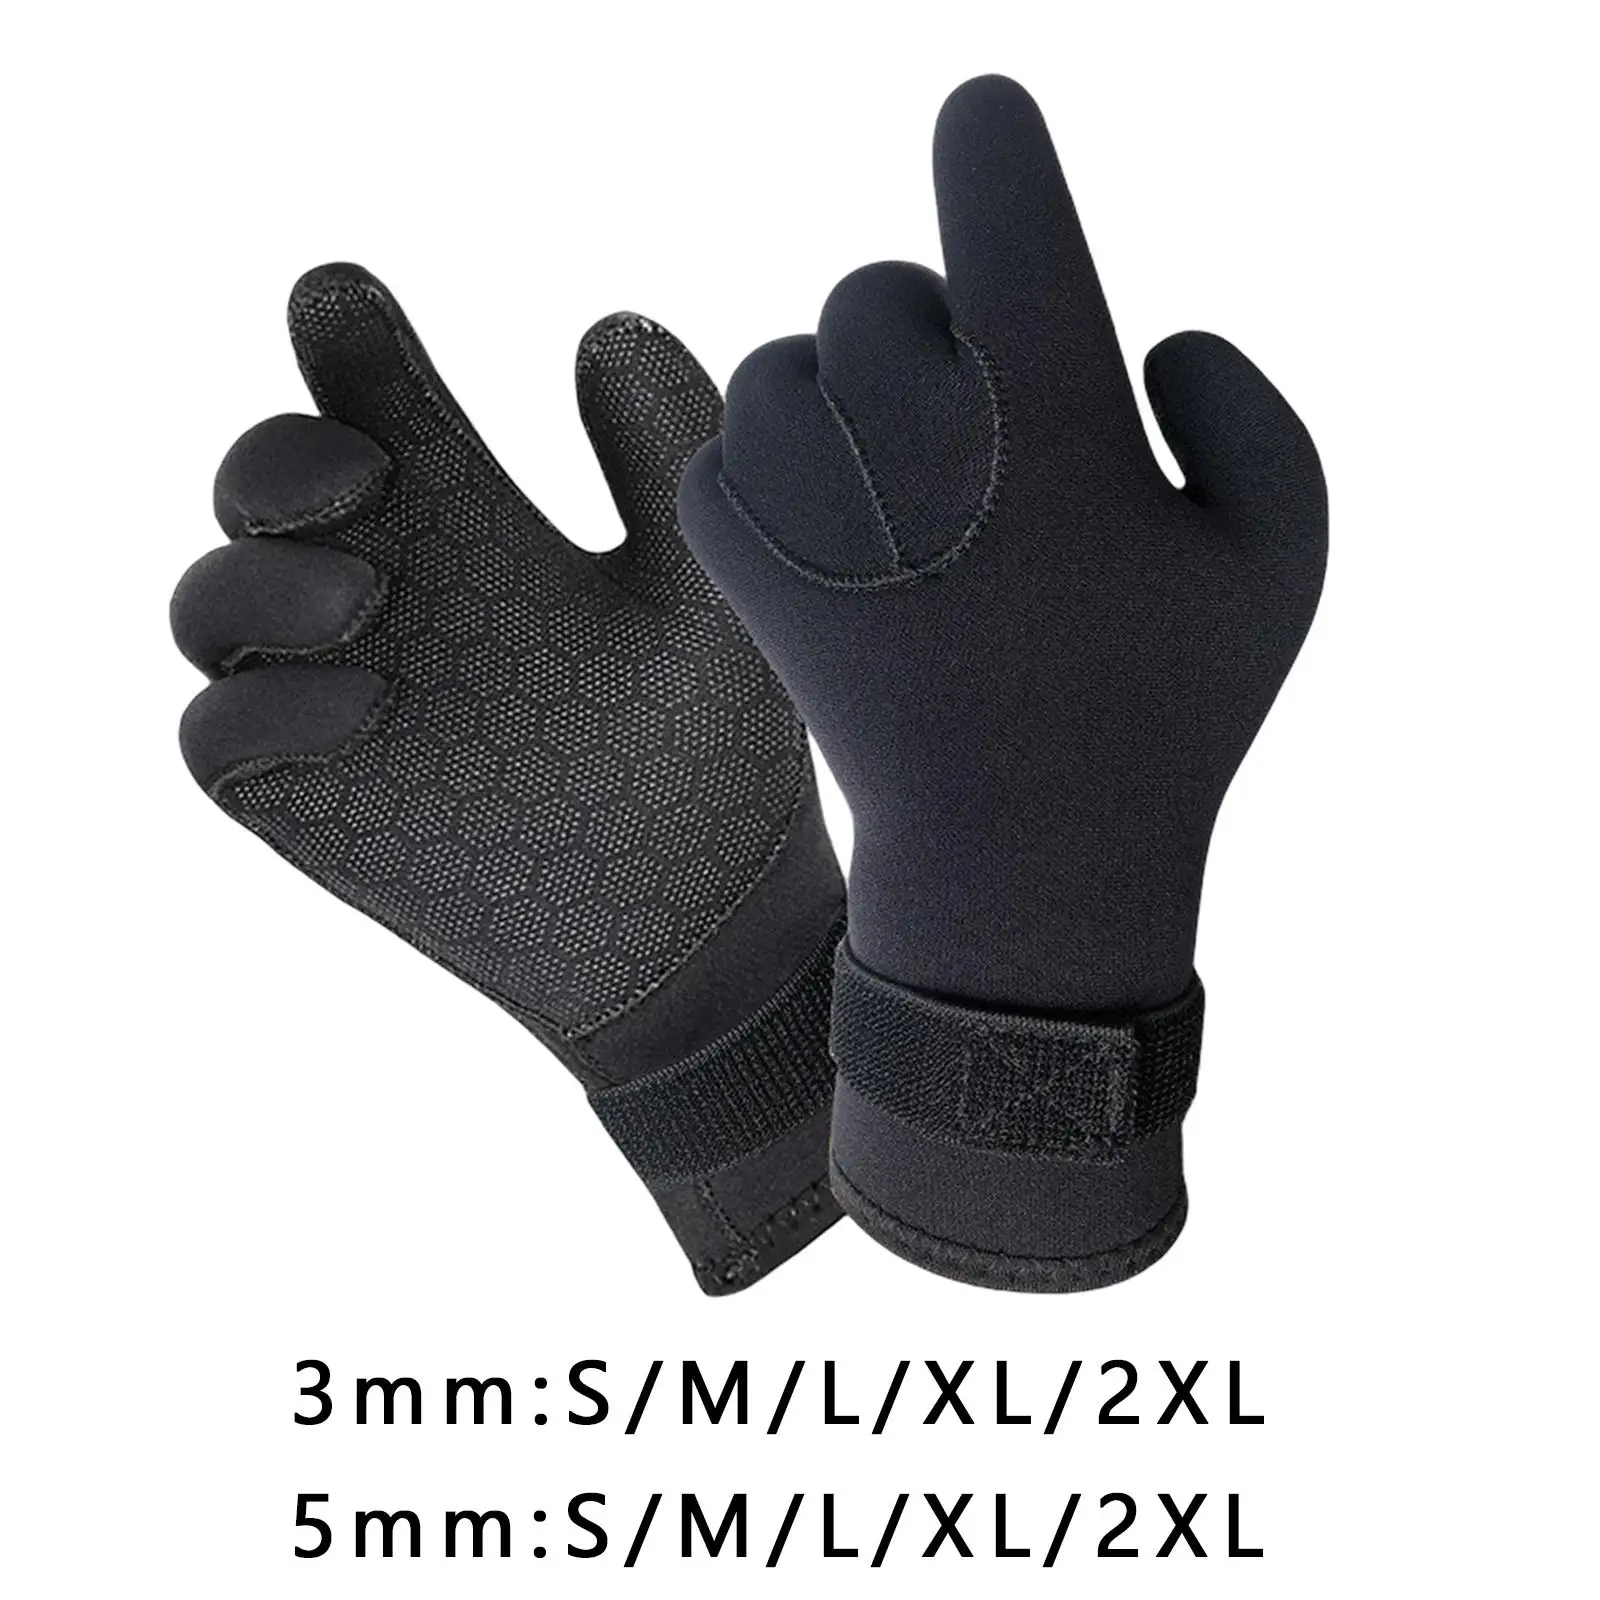 Diving Gloves Thermal Wetsuit Gloves Thermal Gloves Dive Gloves for Water Sports Spearfishing Surfing Snorkeling Paddling